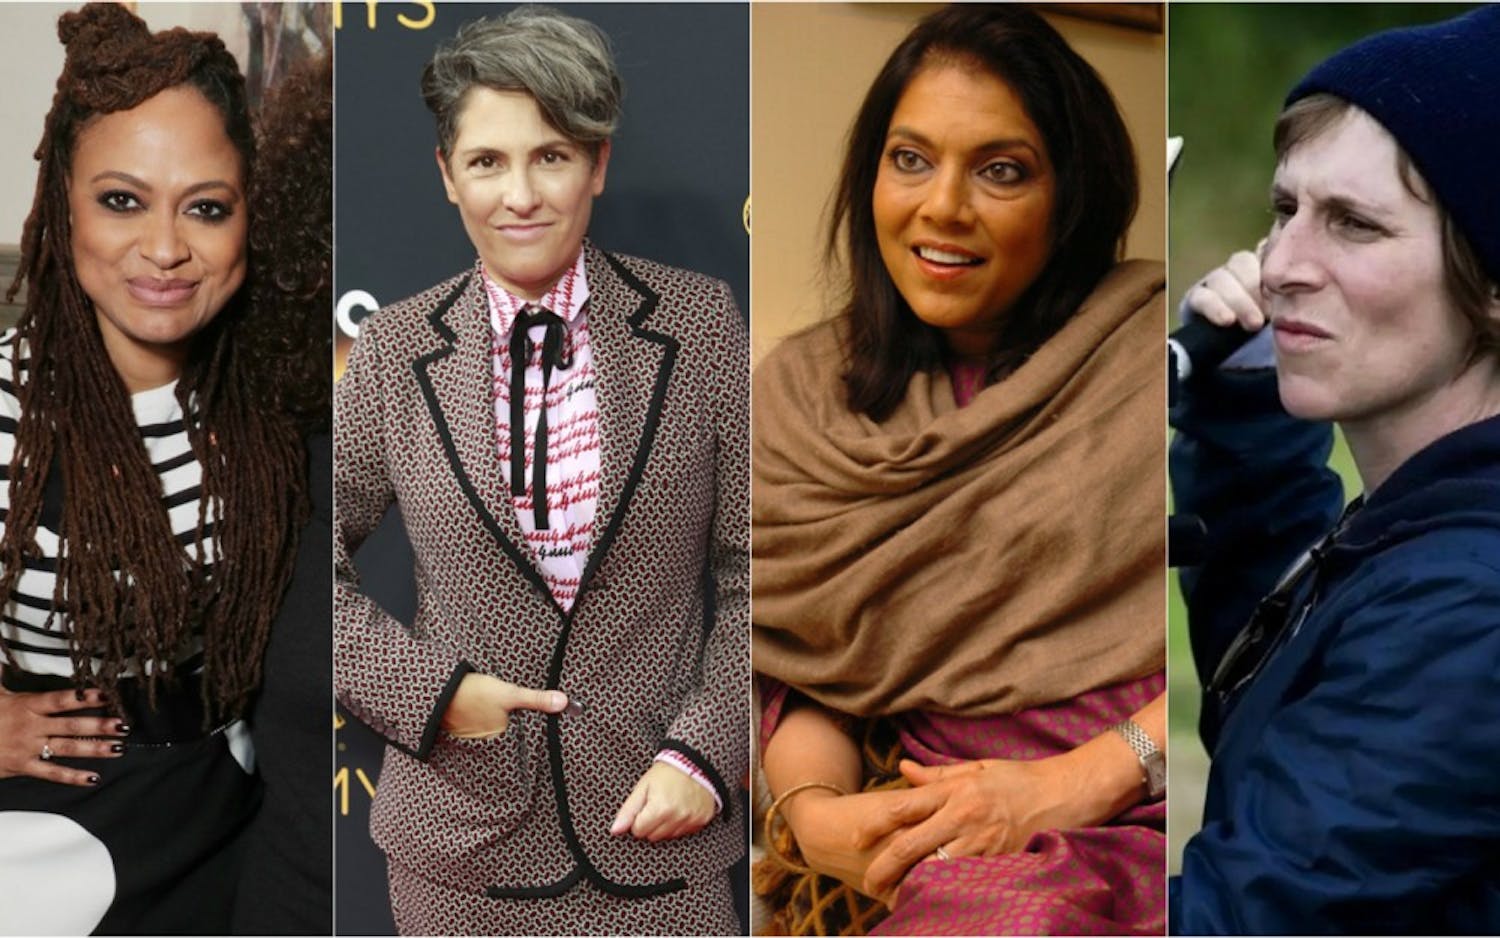 Ava Duvernay, Jill Soloway, Mira Nair and Kelly Reichardt are just a few of many capable female directors in Hollywood.